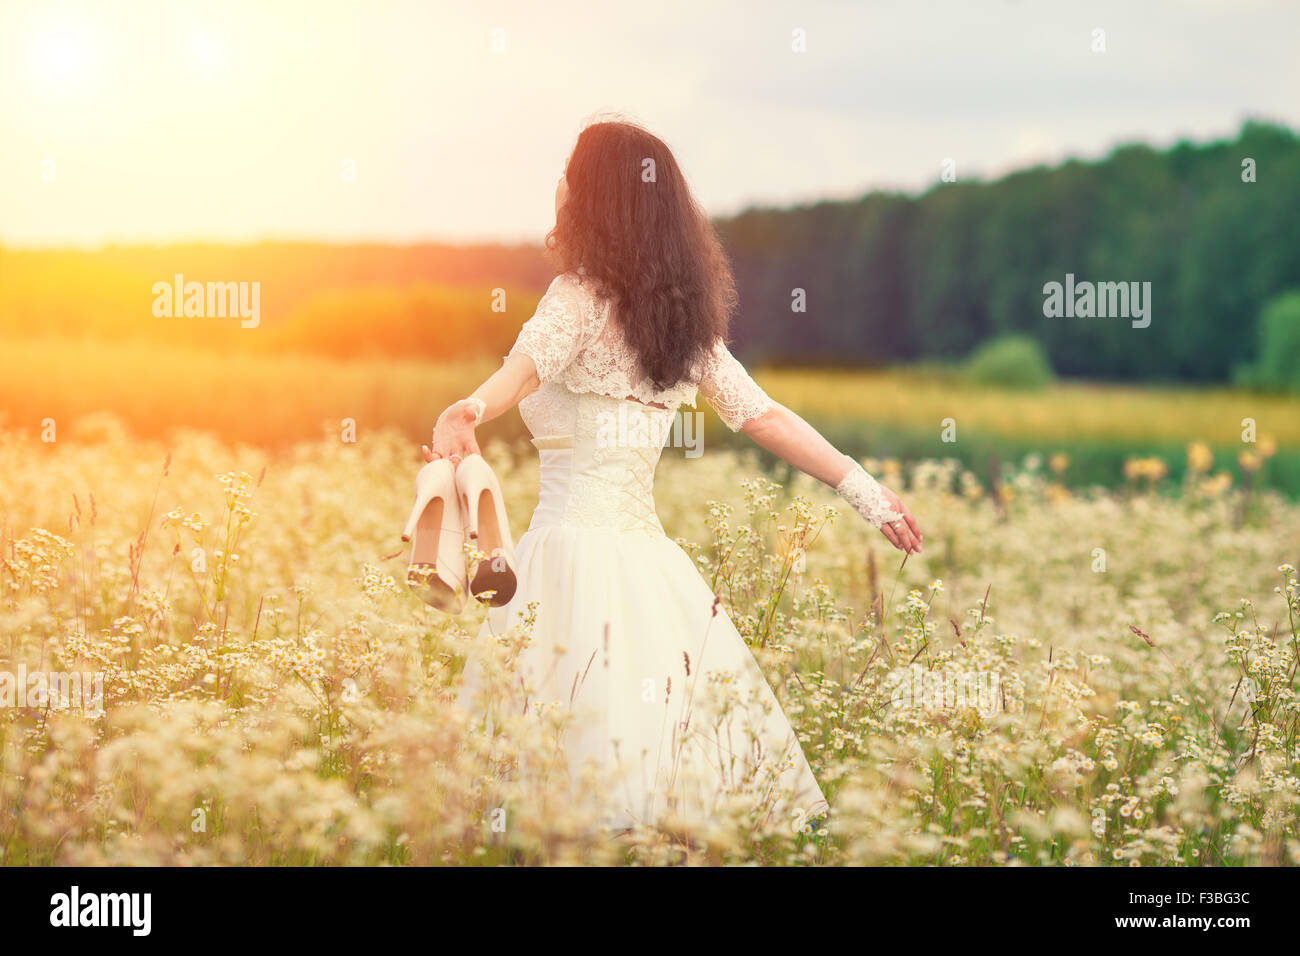 Young bride holding shoes walking on the flower meadow Banque D'Images